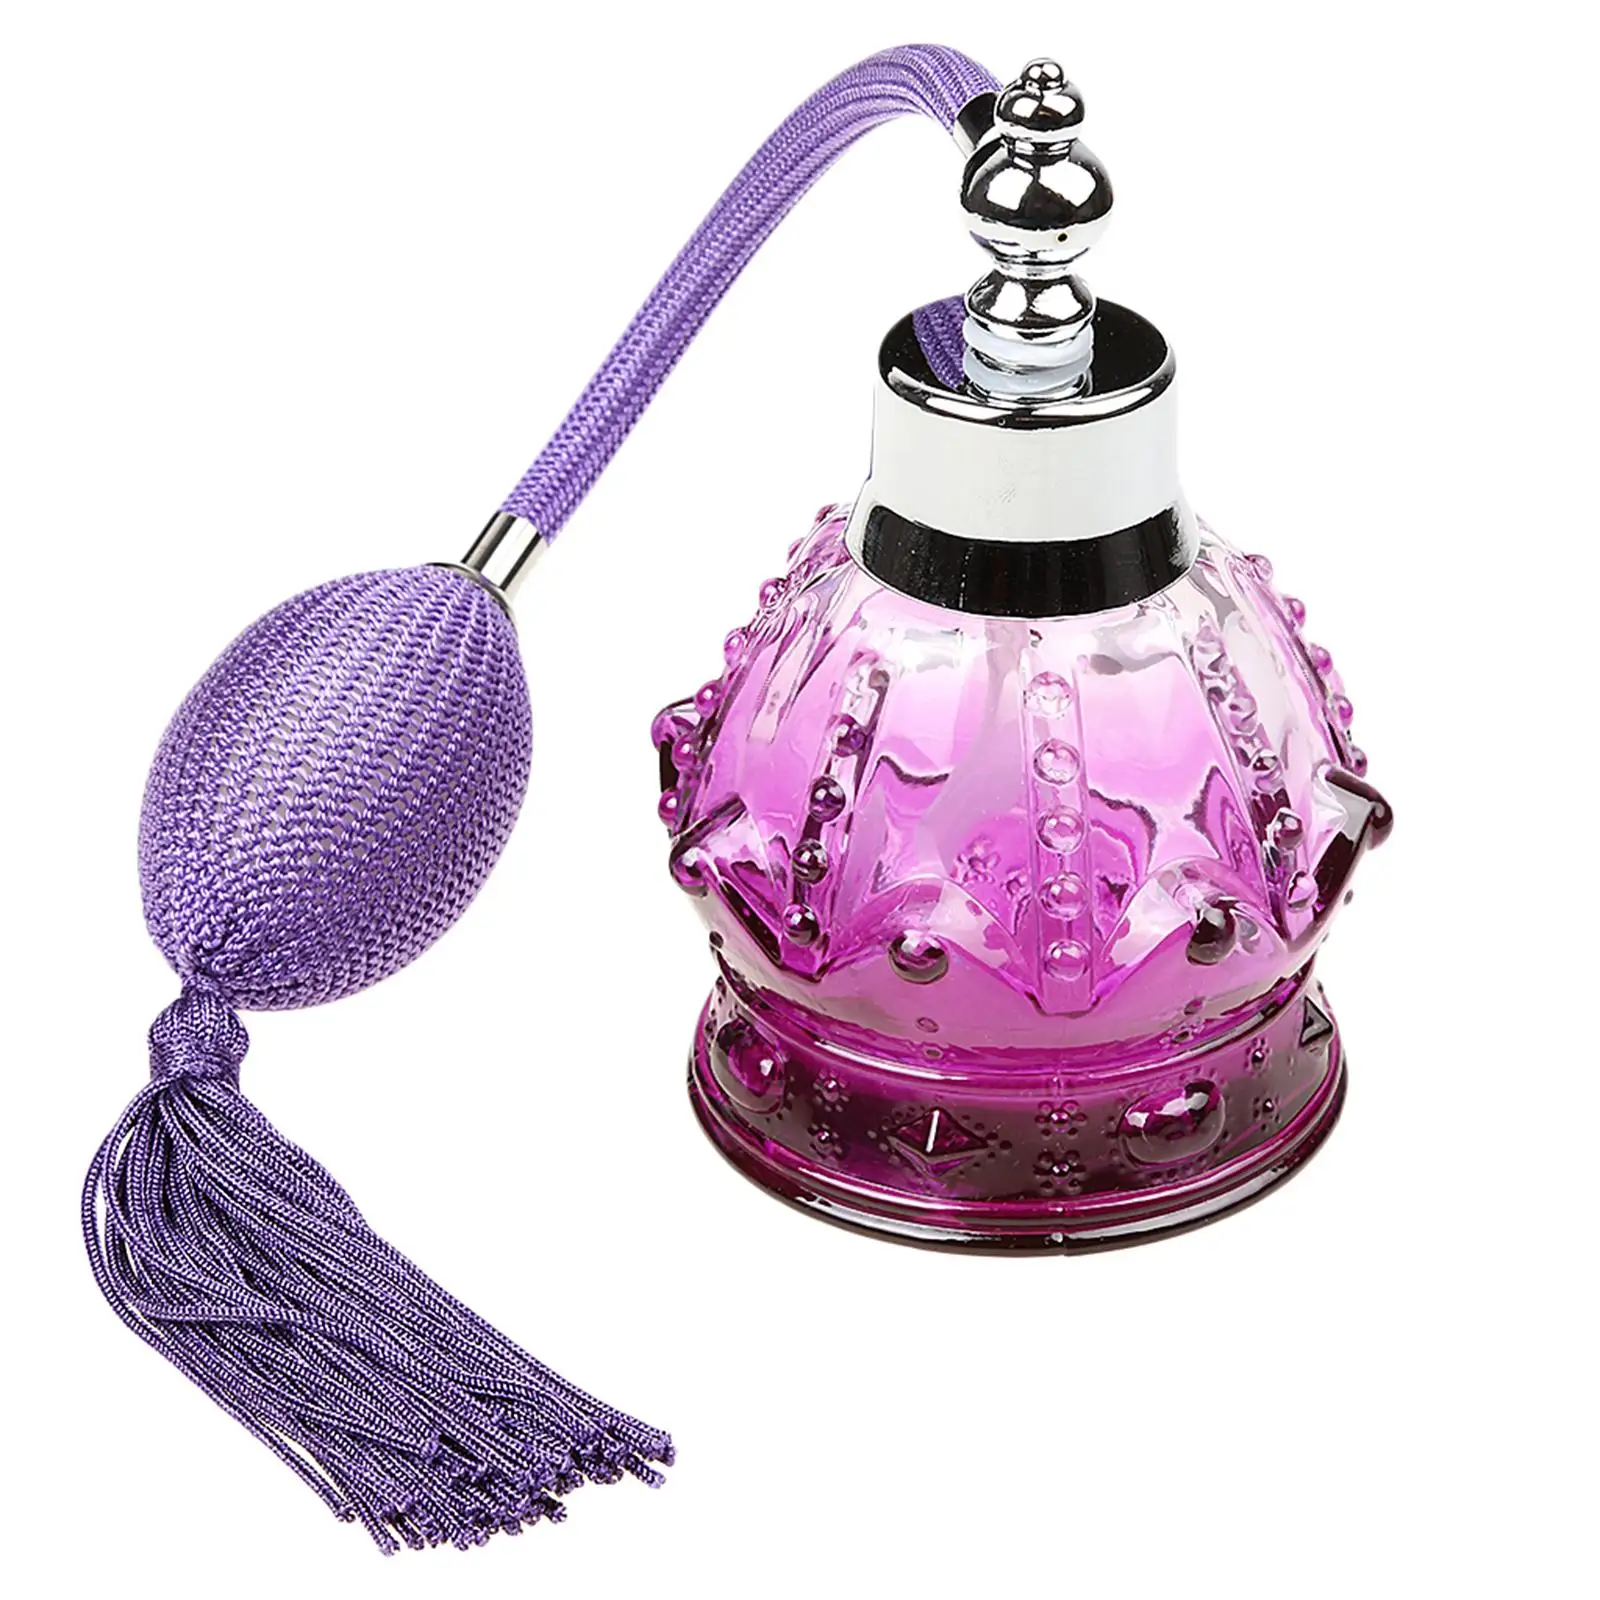  Perfume Bottle with Long Spray  Refillable Ldies Elegant Gift